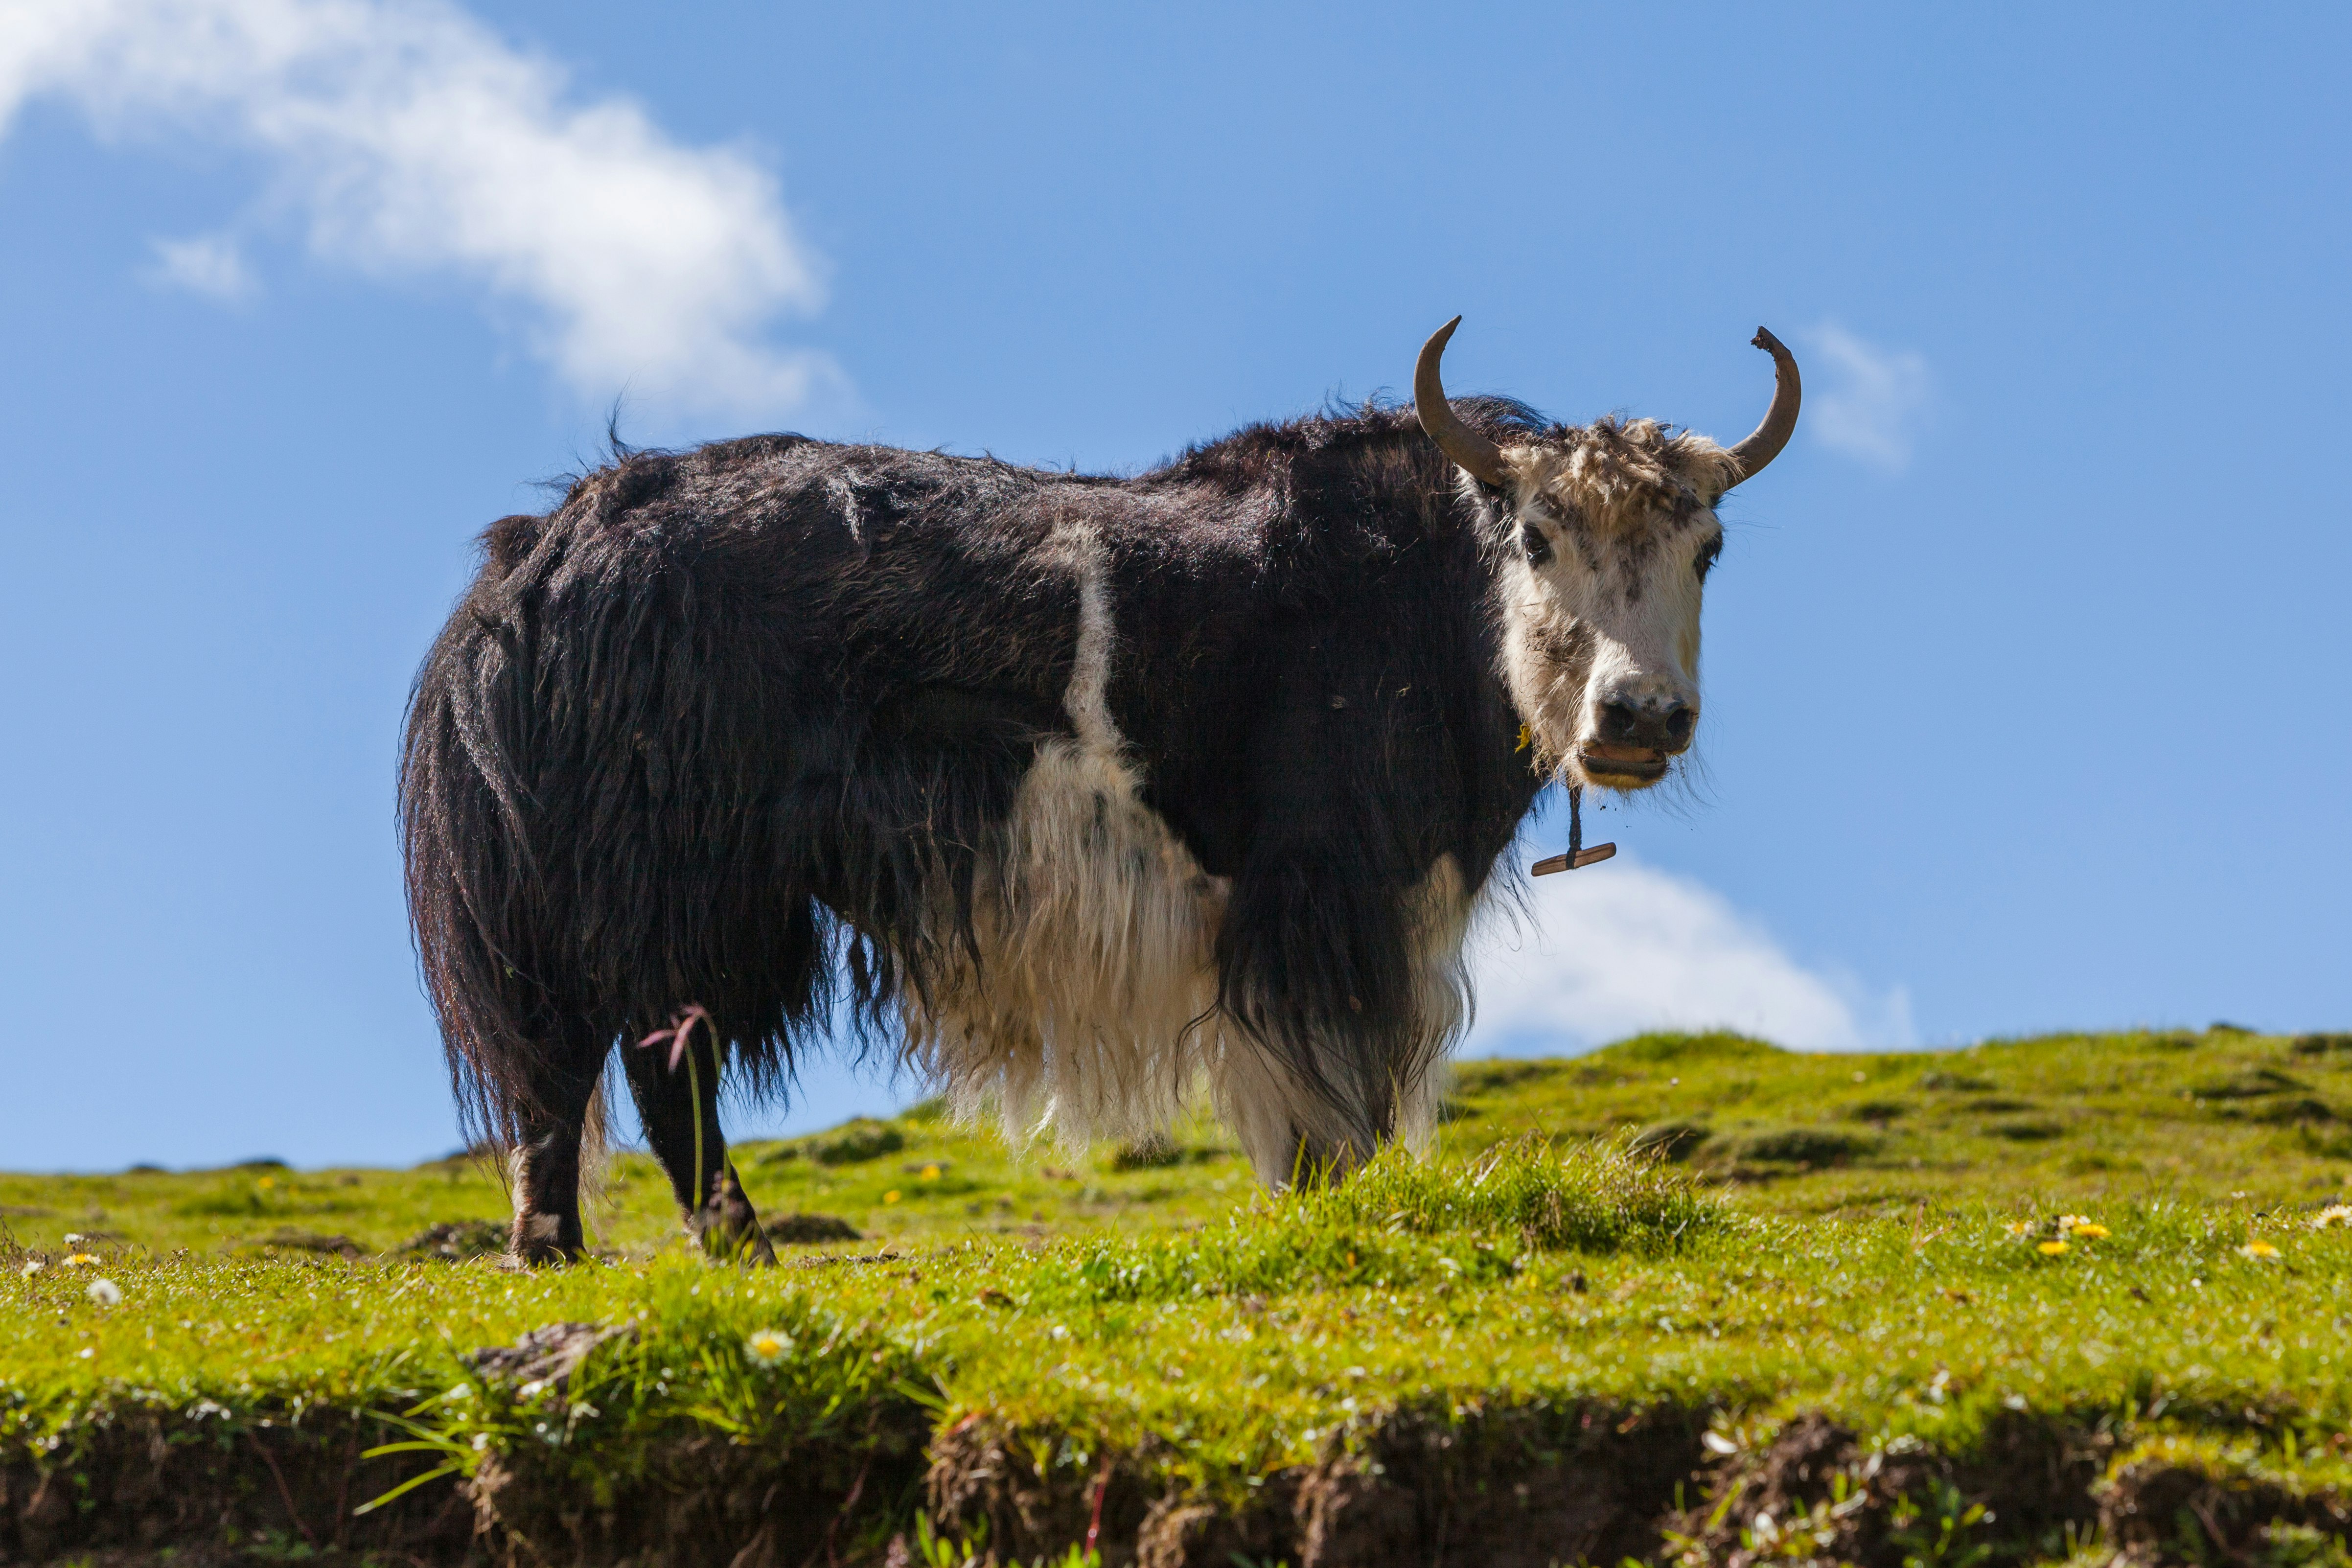 Domestic yak (Bos grunniens) on grassland in the province of Qinghai, China